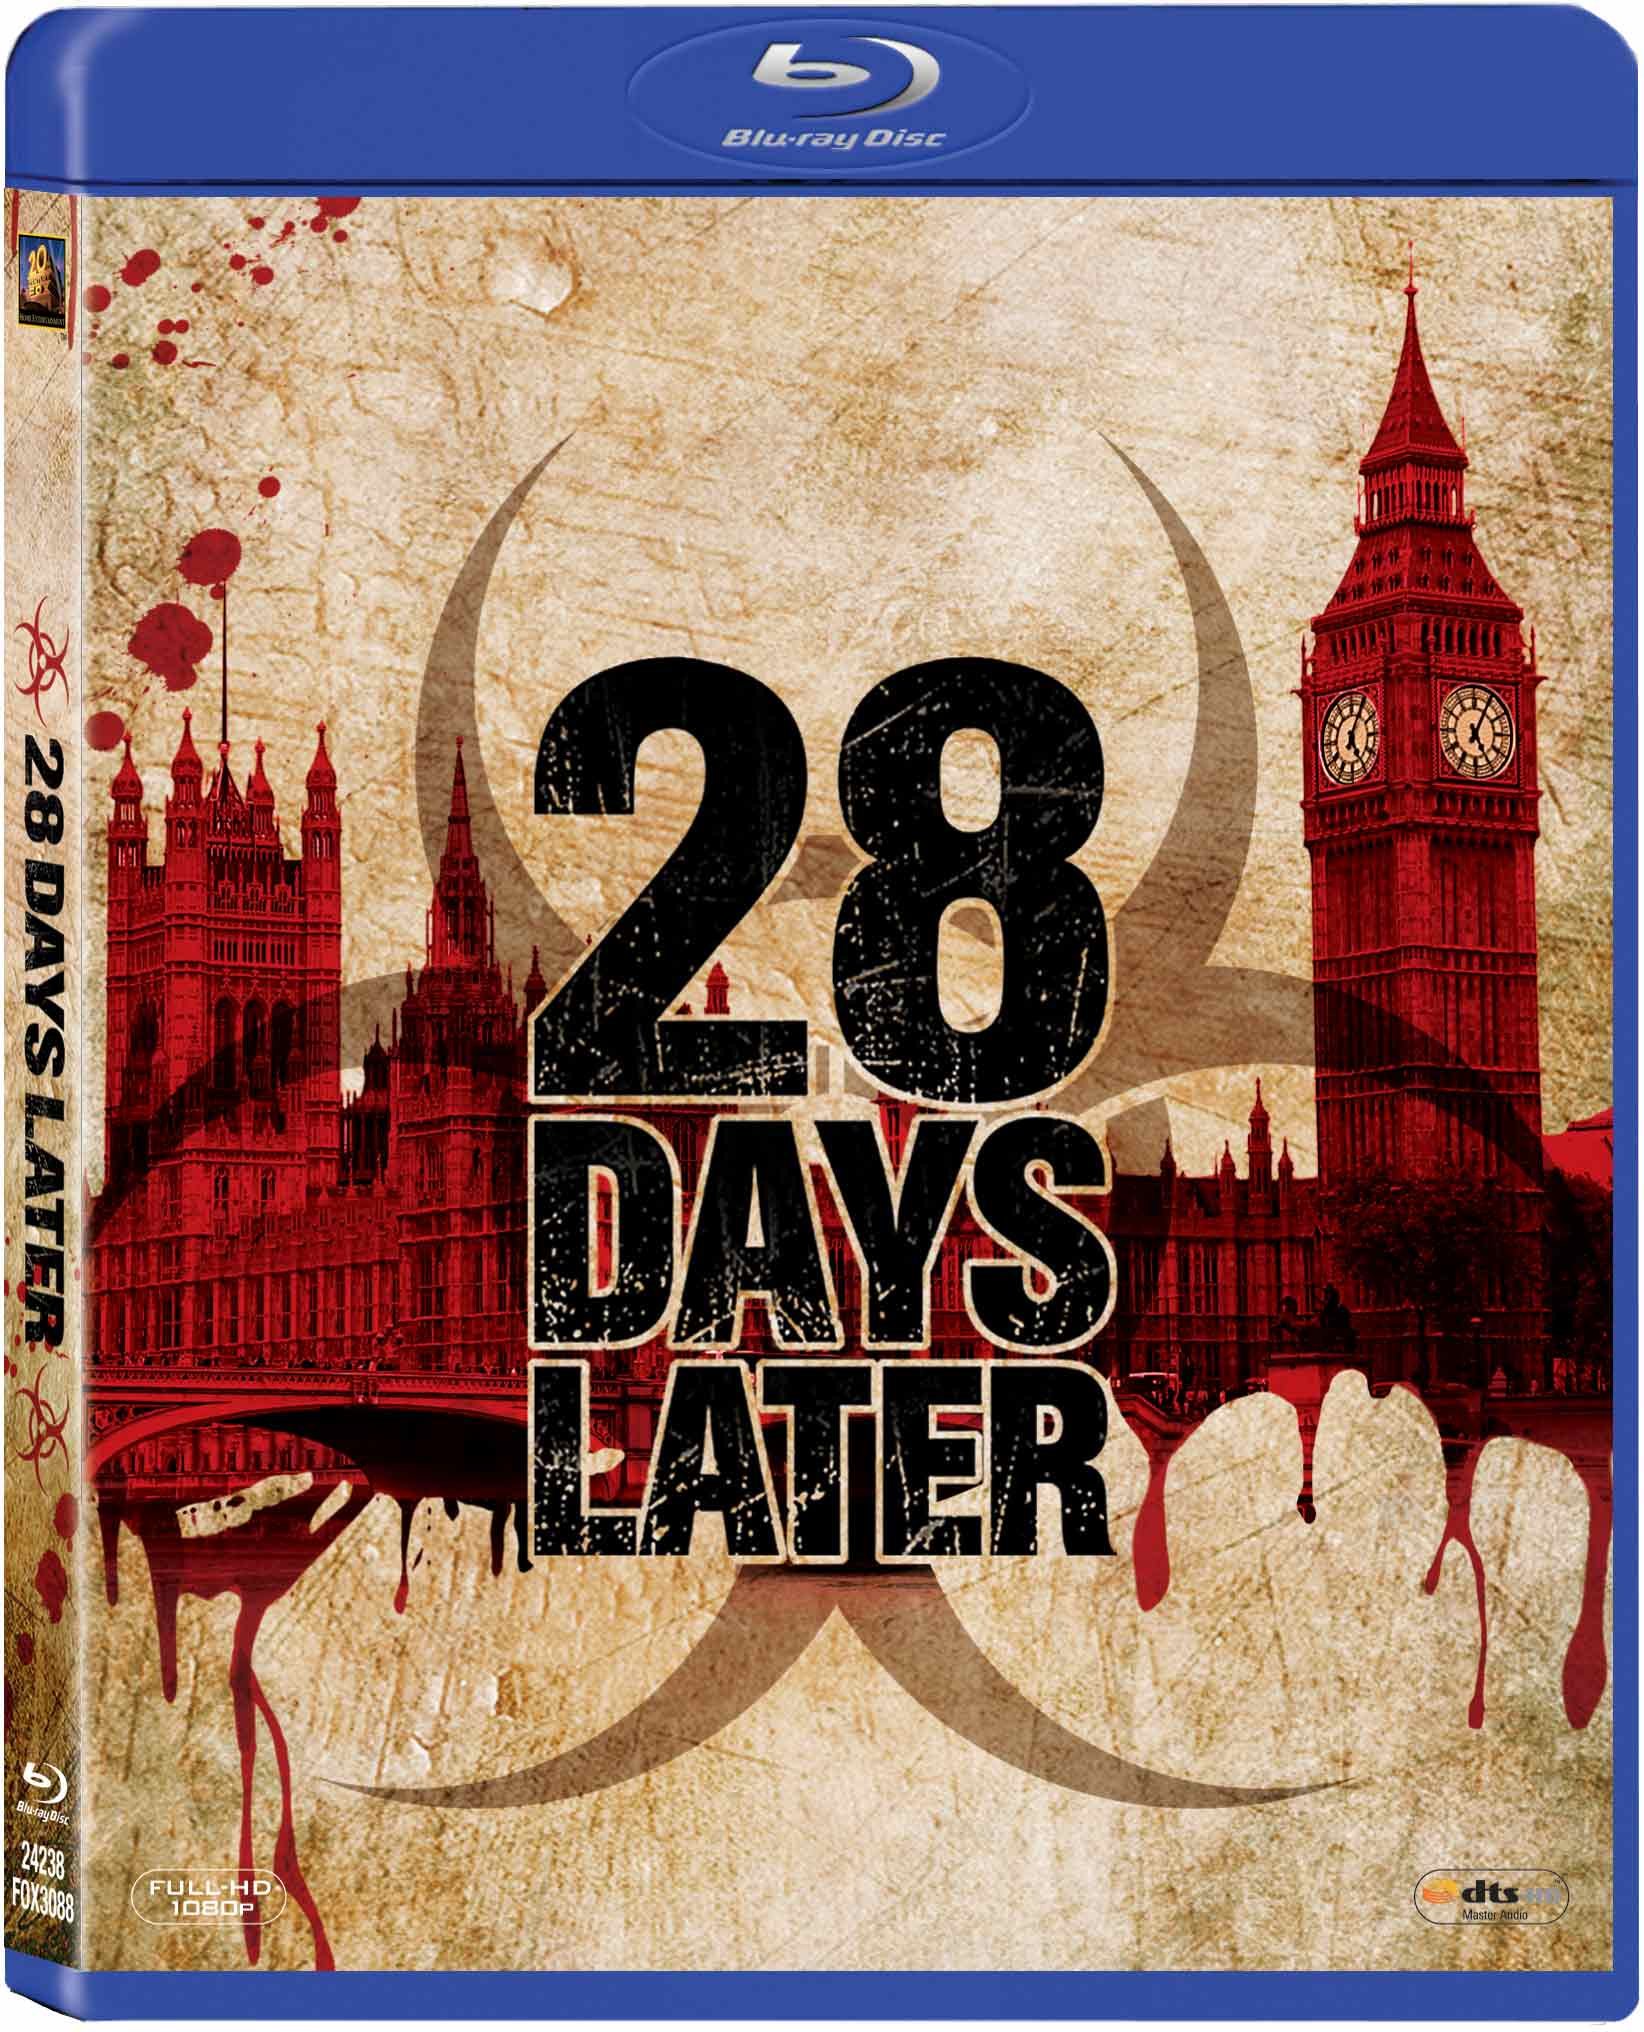 28-days-later-blu-ray-movie-purchase-or-watch-online